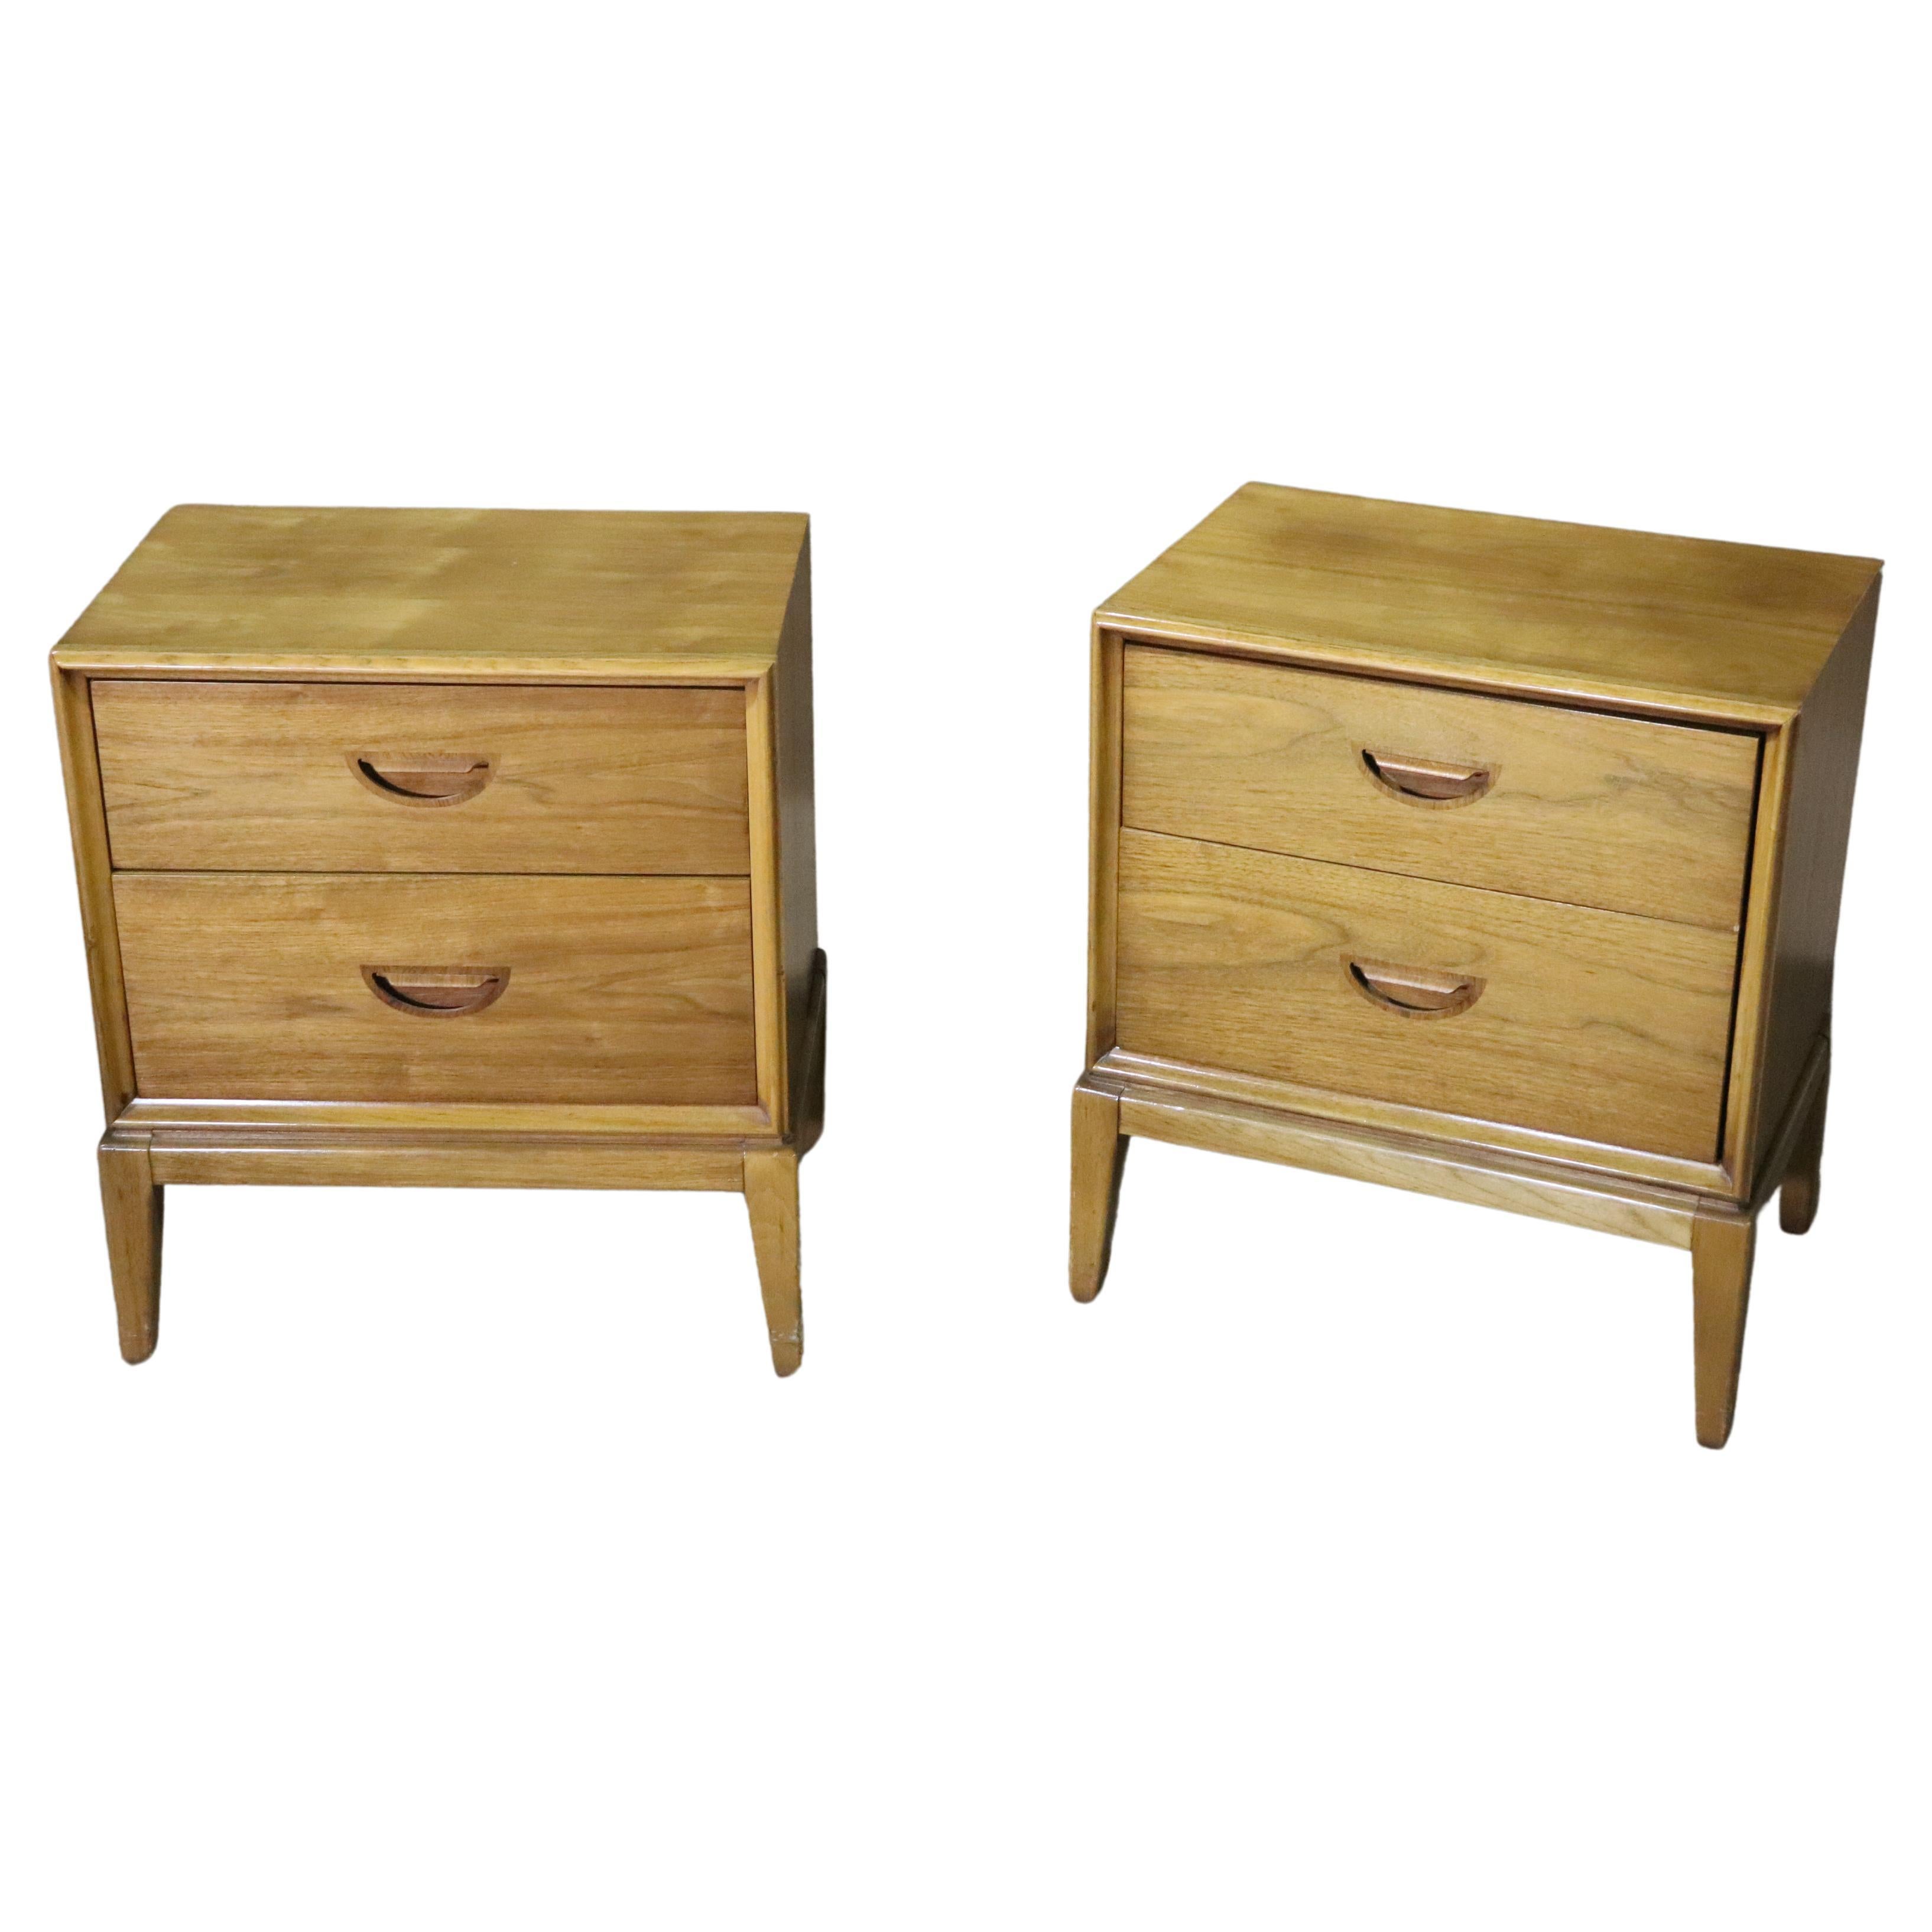 Vintage End Tables w/ Inset Rosewood Handles For Sale